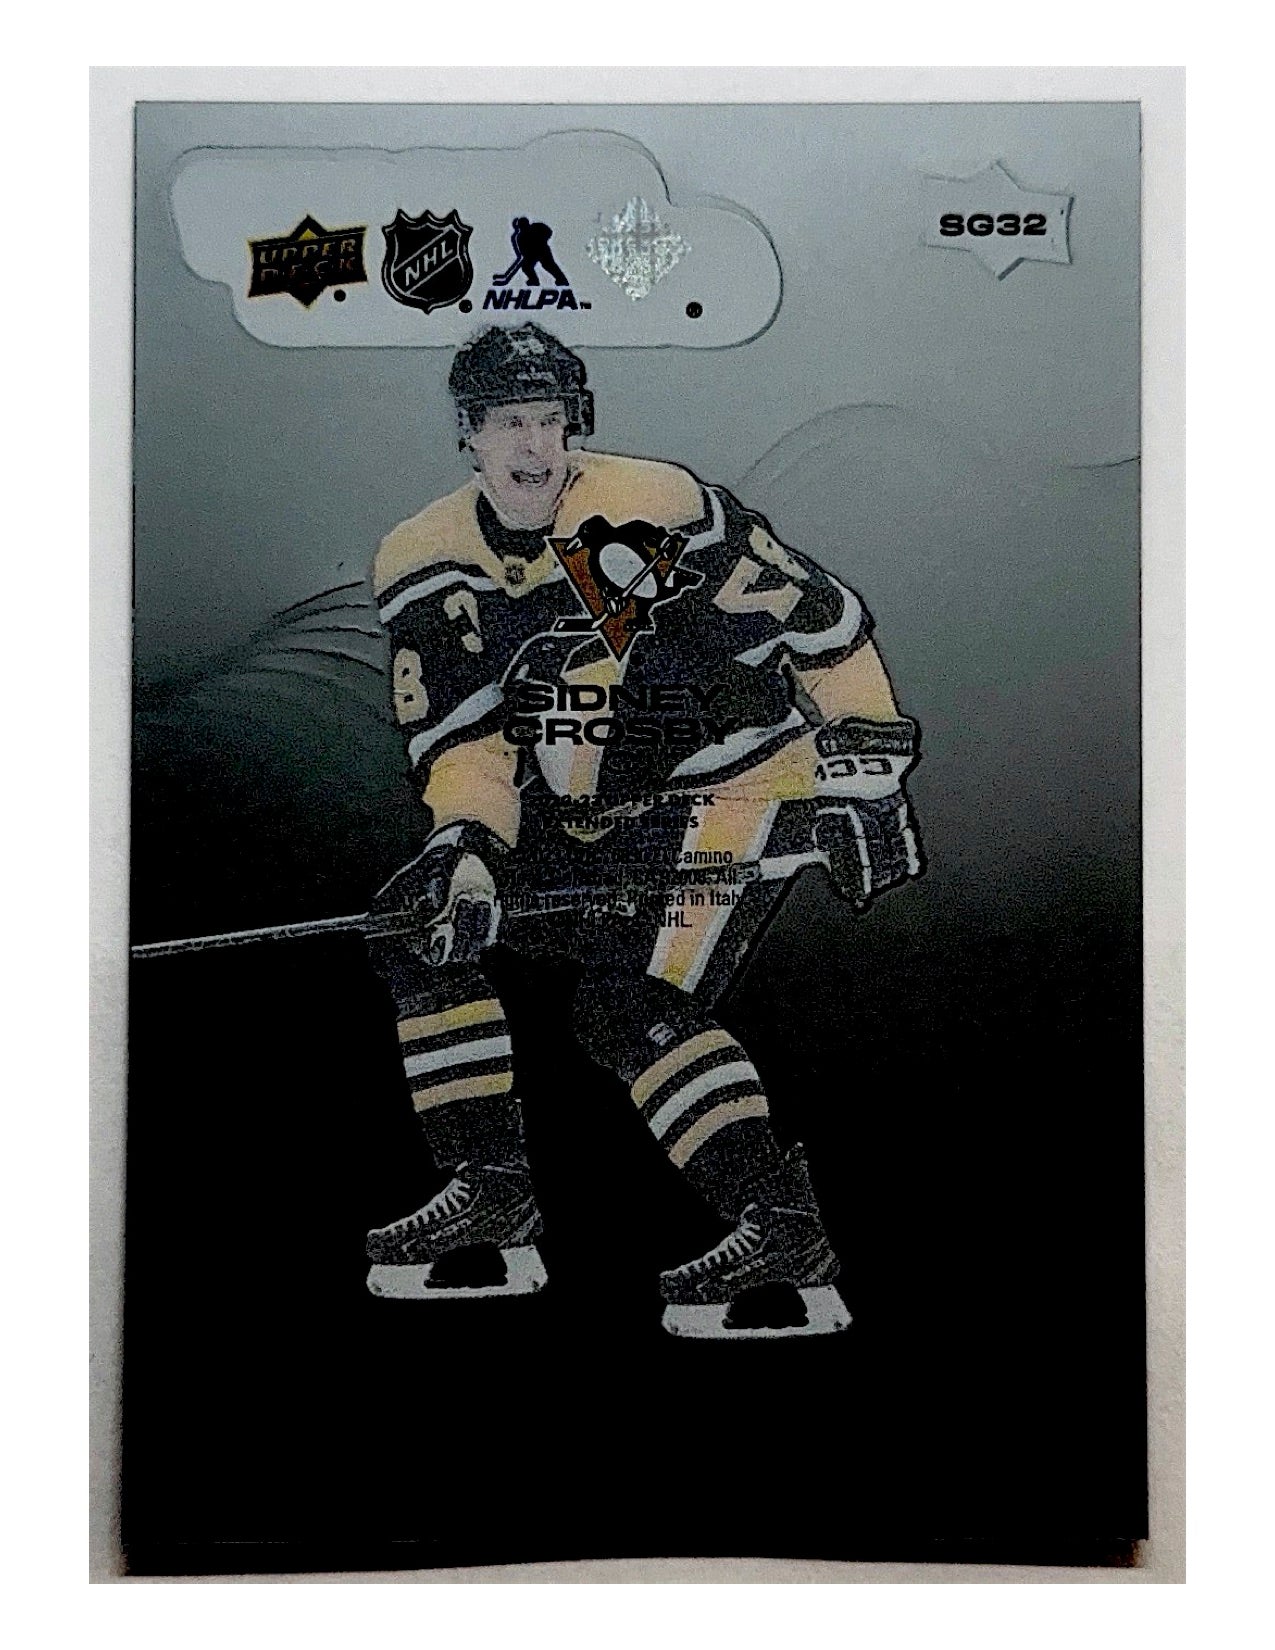 Sidney Crosby 2022-23 Upper Deck Extended Series Smooth Grooves #SG32